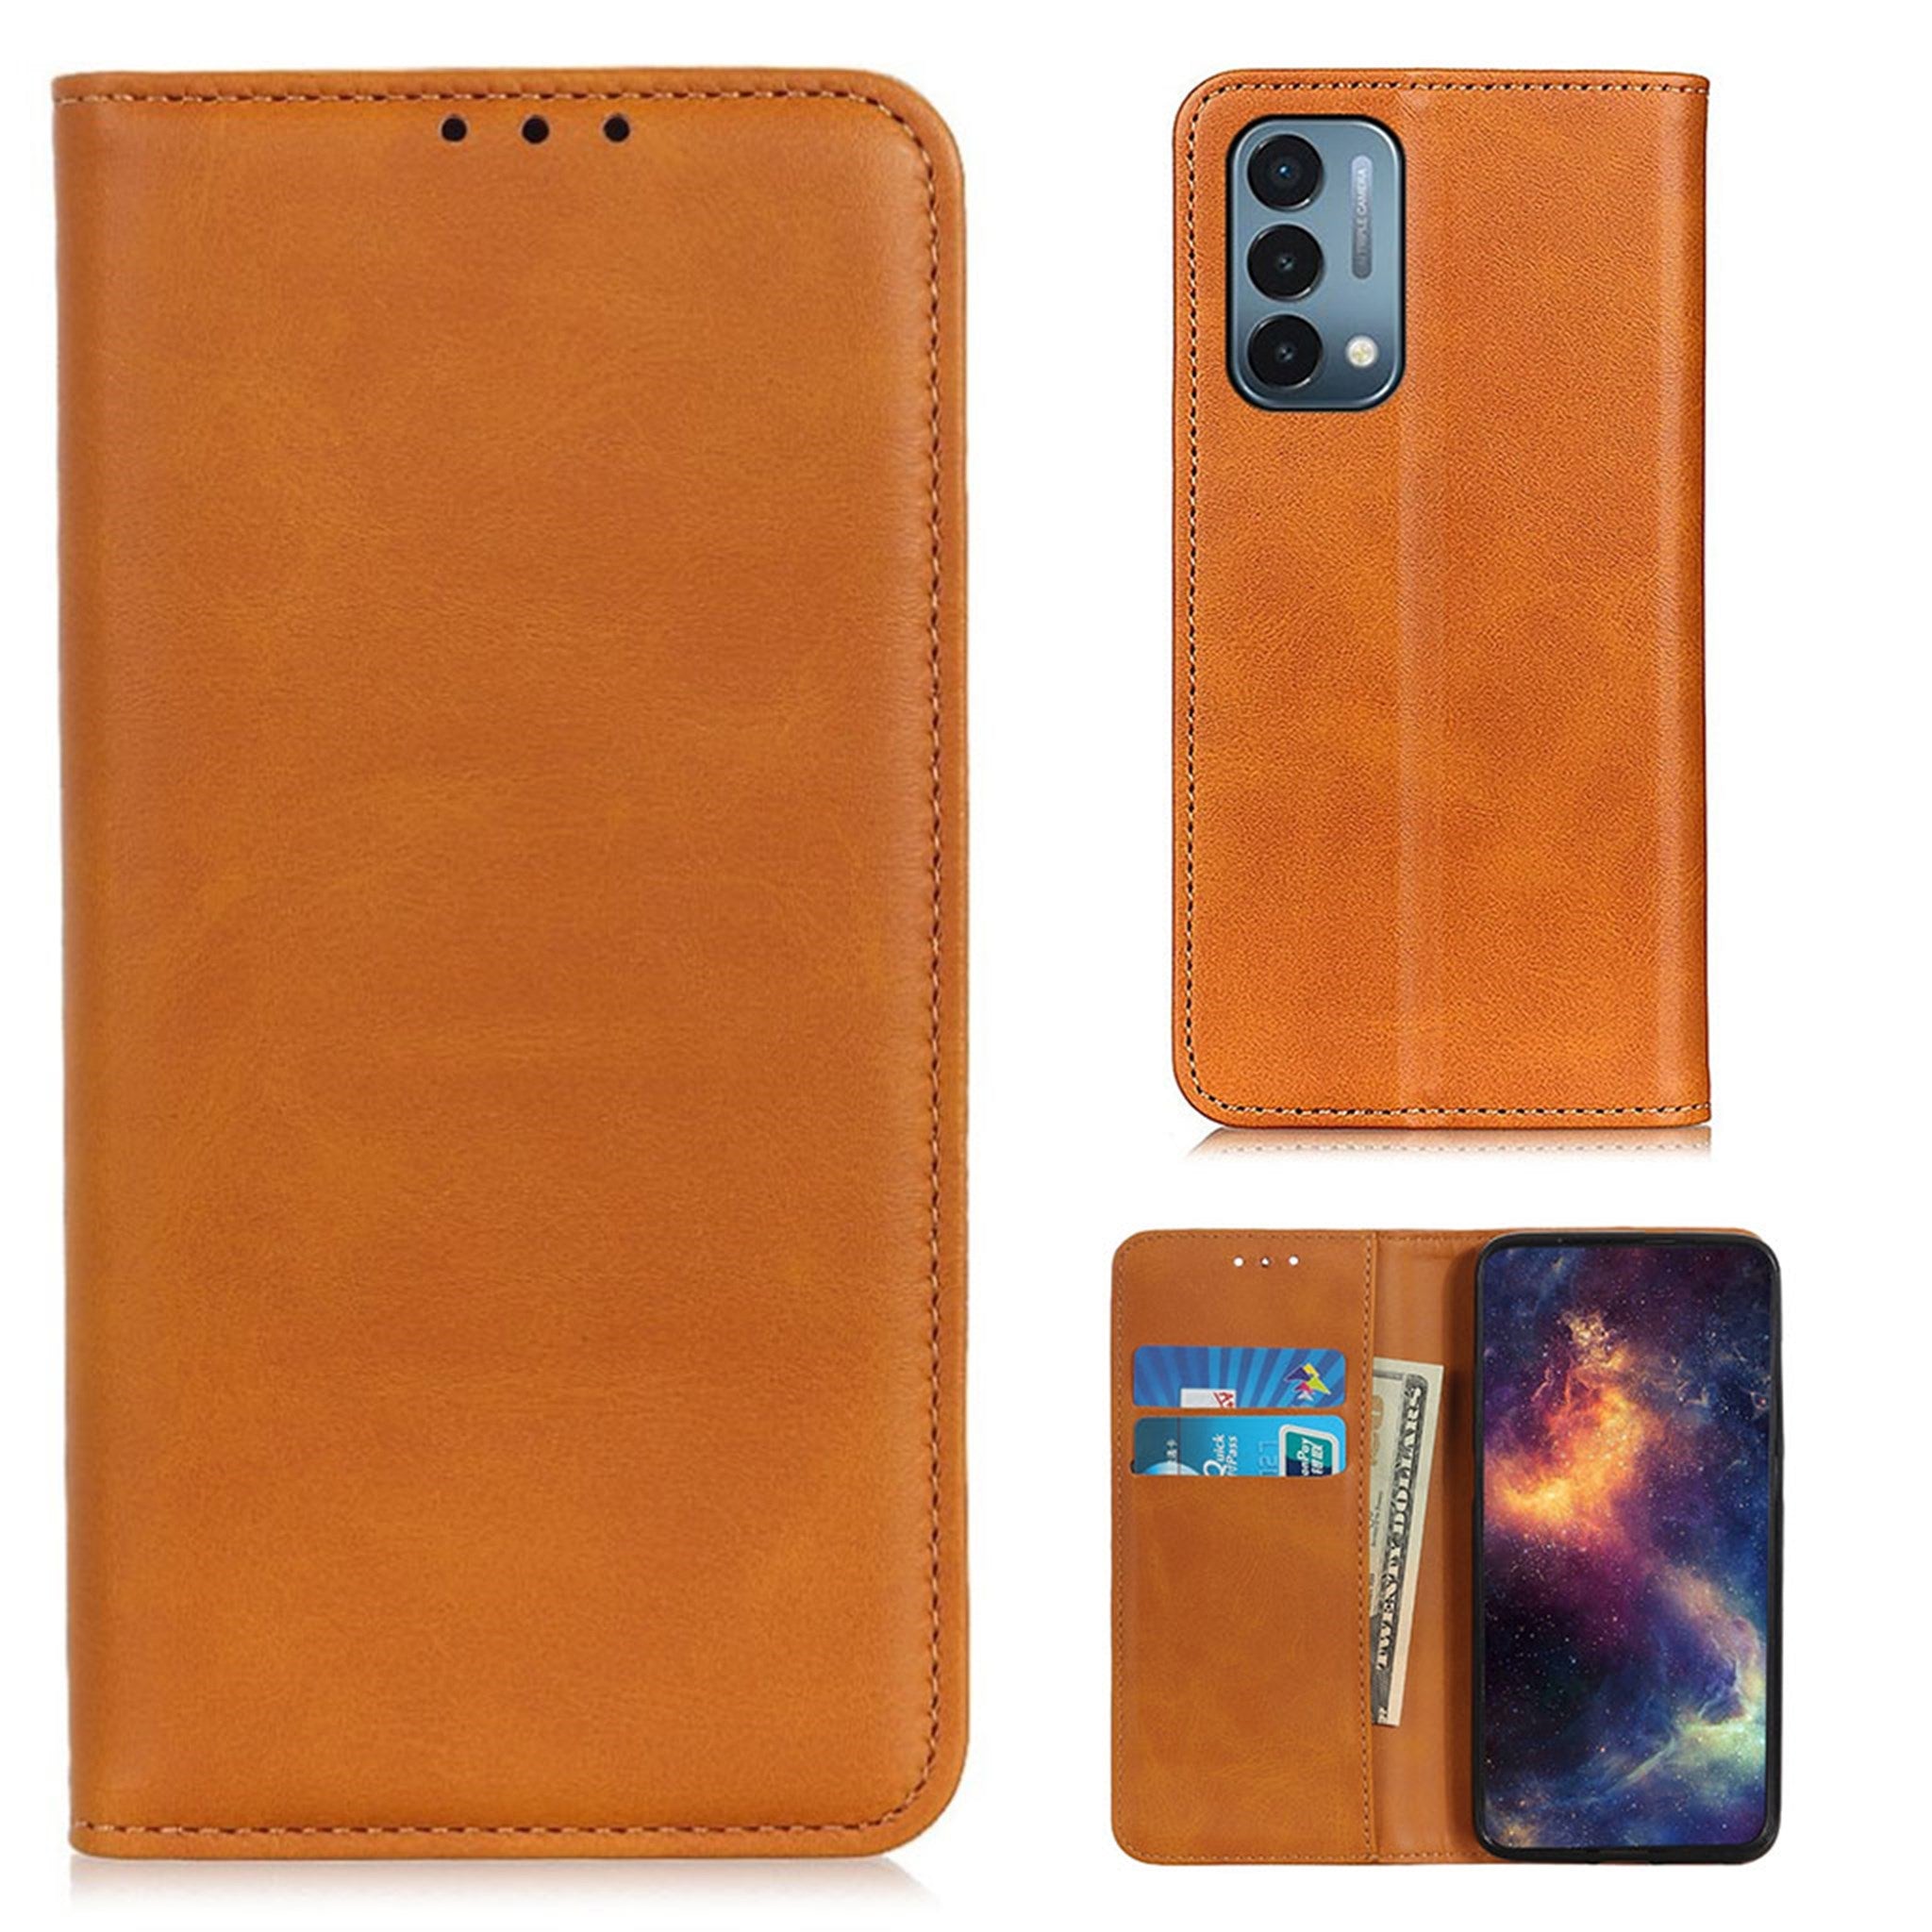 Wallet-style genuine leather flipcase for OnePlus Nord N200 5G - Brown